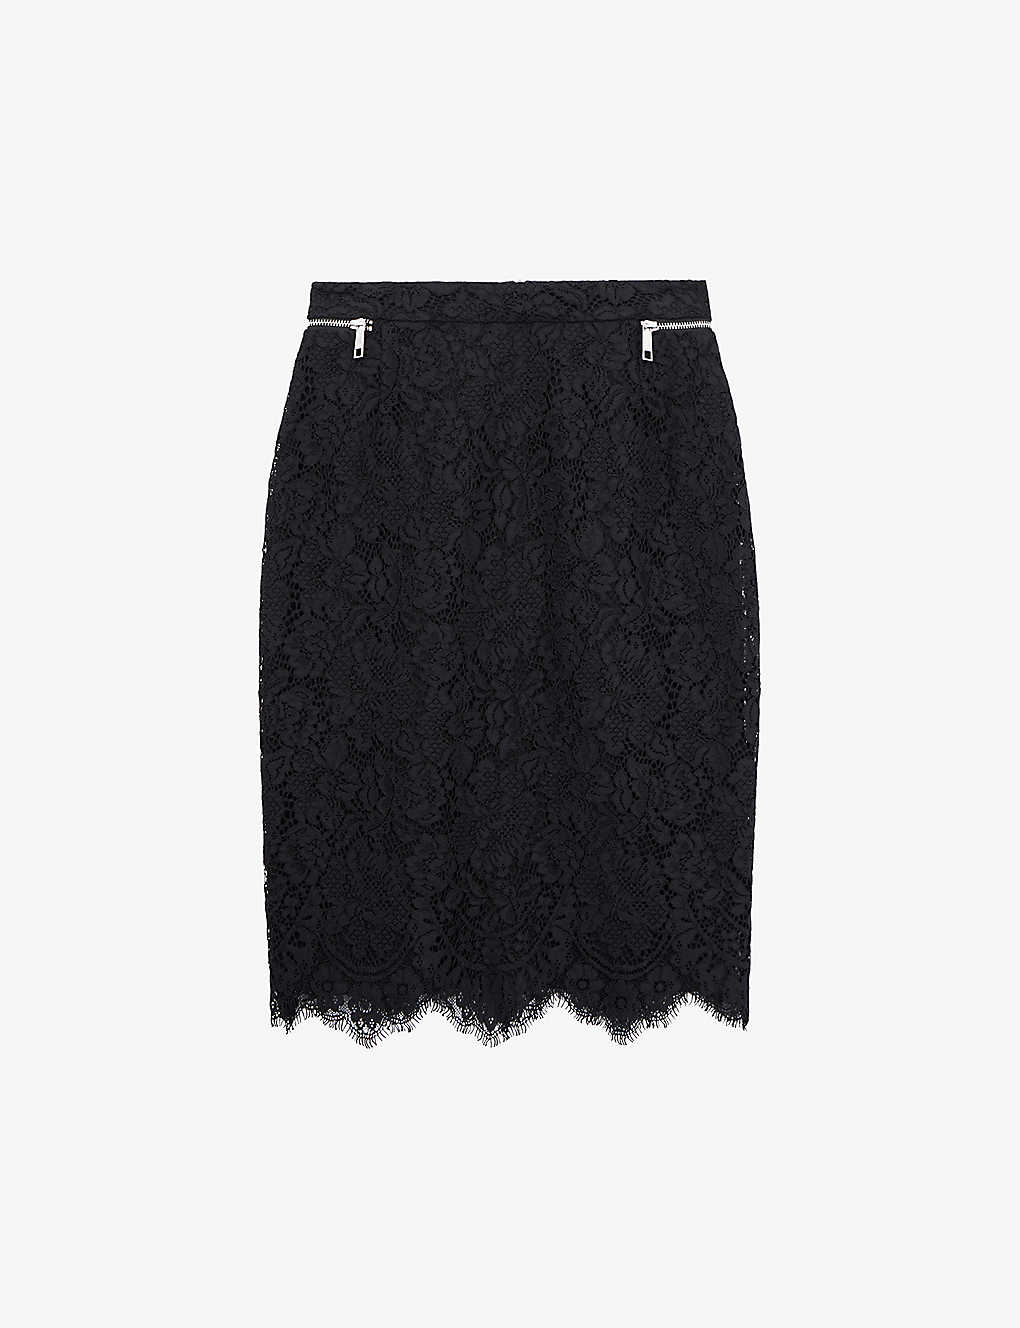 The Kooples Womens Black Floral-lace Zip-embellished Woven Mini Skirt